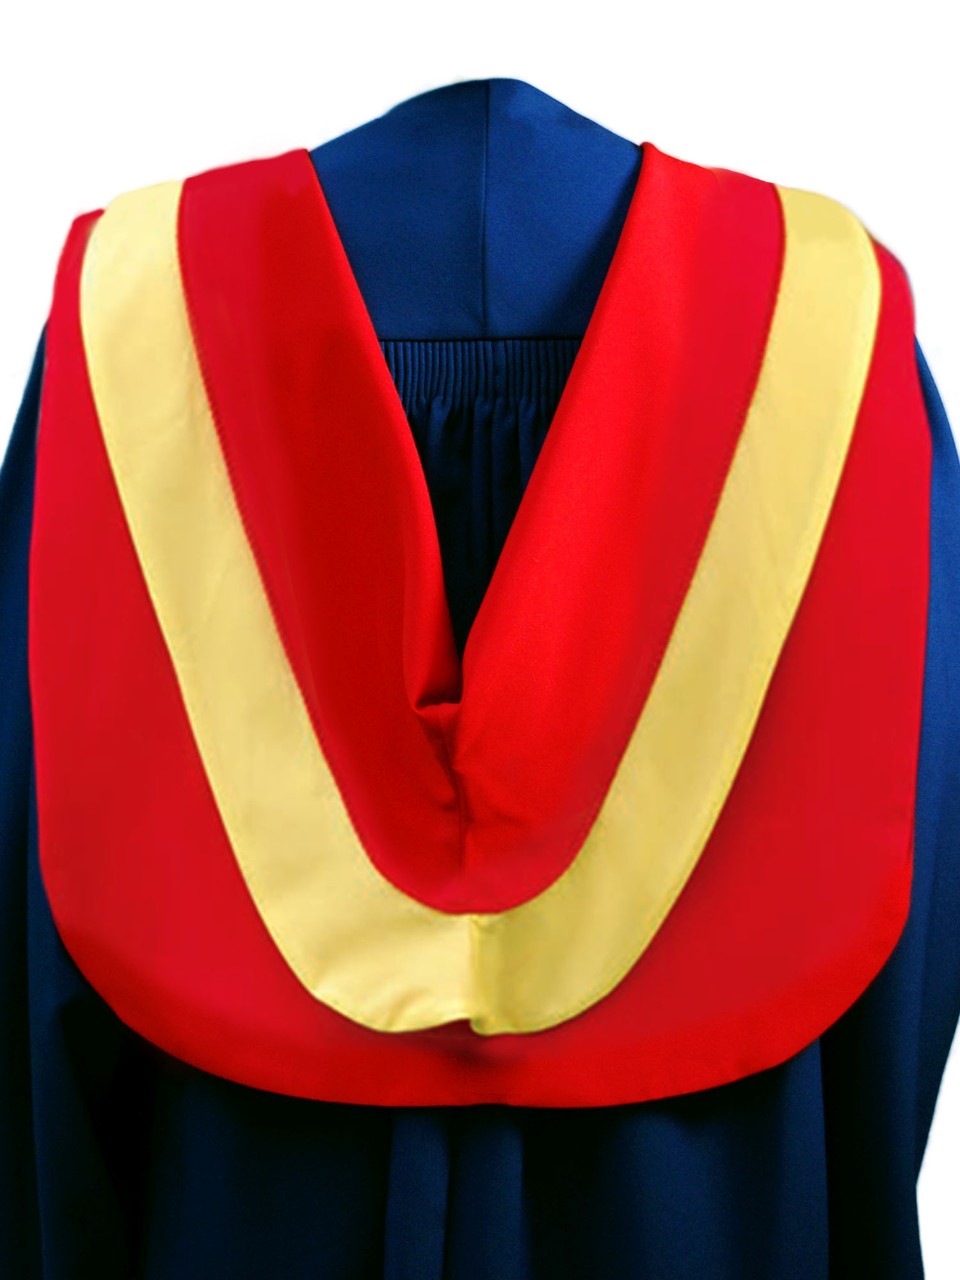 The Master of Public Health hood is red with wide yellow border, red cording